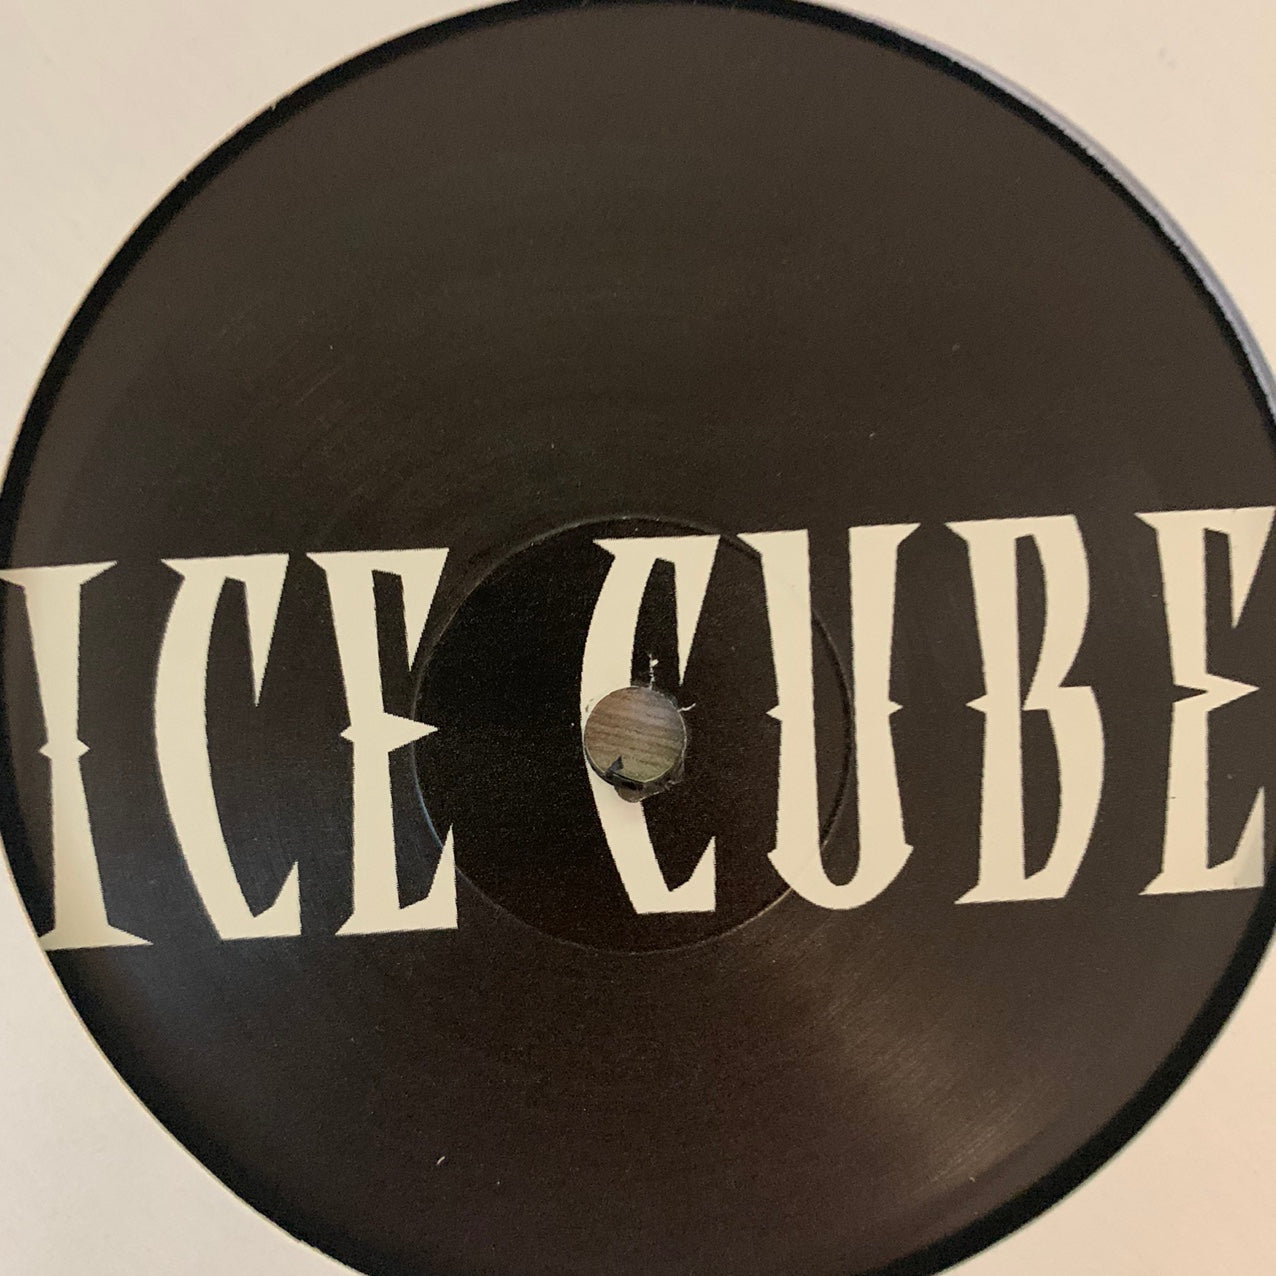 Ice Cube “Chrome & Paint” / “You Got A Lot Of That” 4 Version 12inch Vinyl